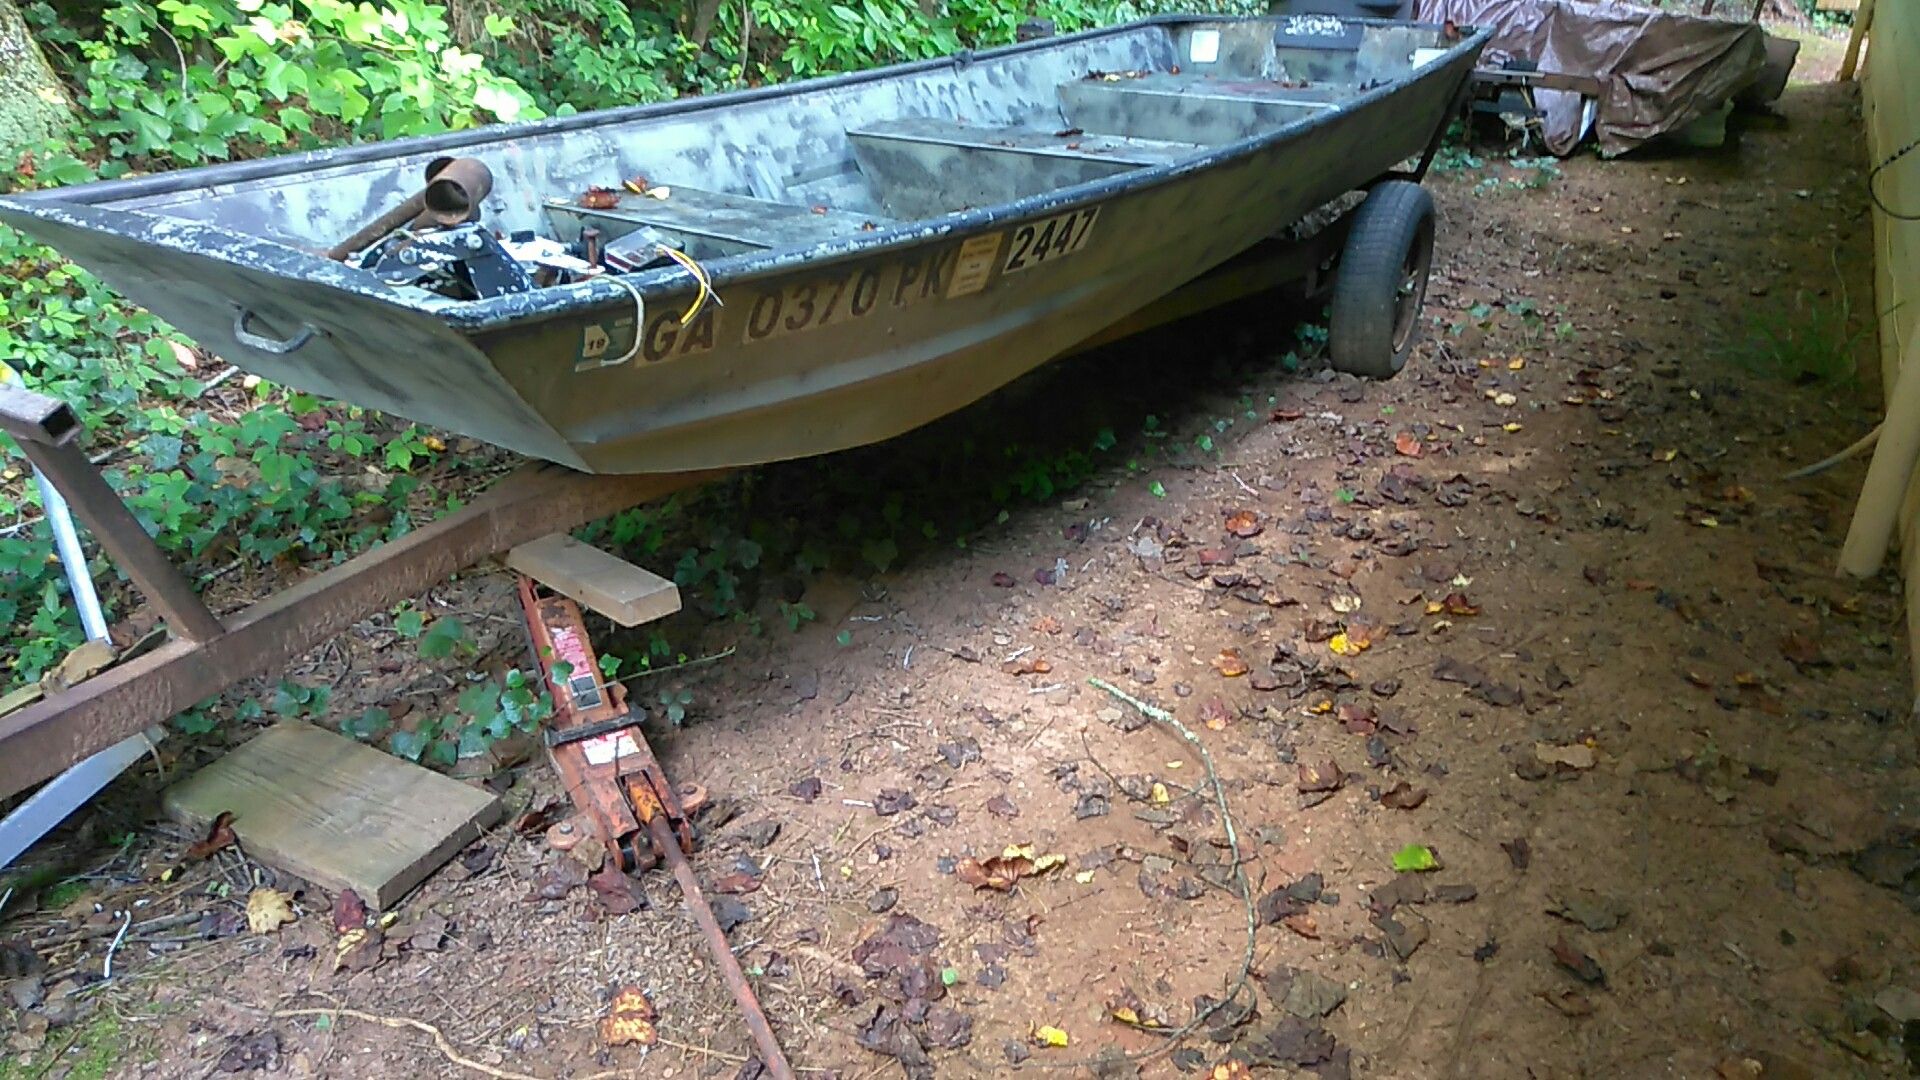 14 ft heavy gauge aluminum Jon boat with 3.5 outboard & new motor guide trolling motor with new Marine battery